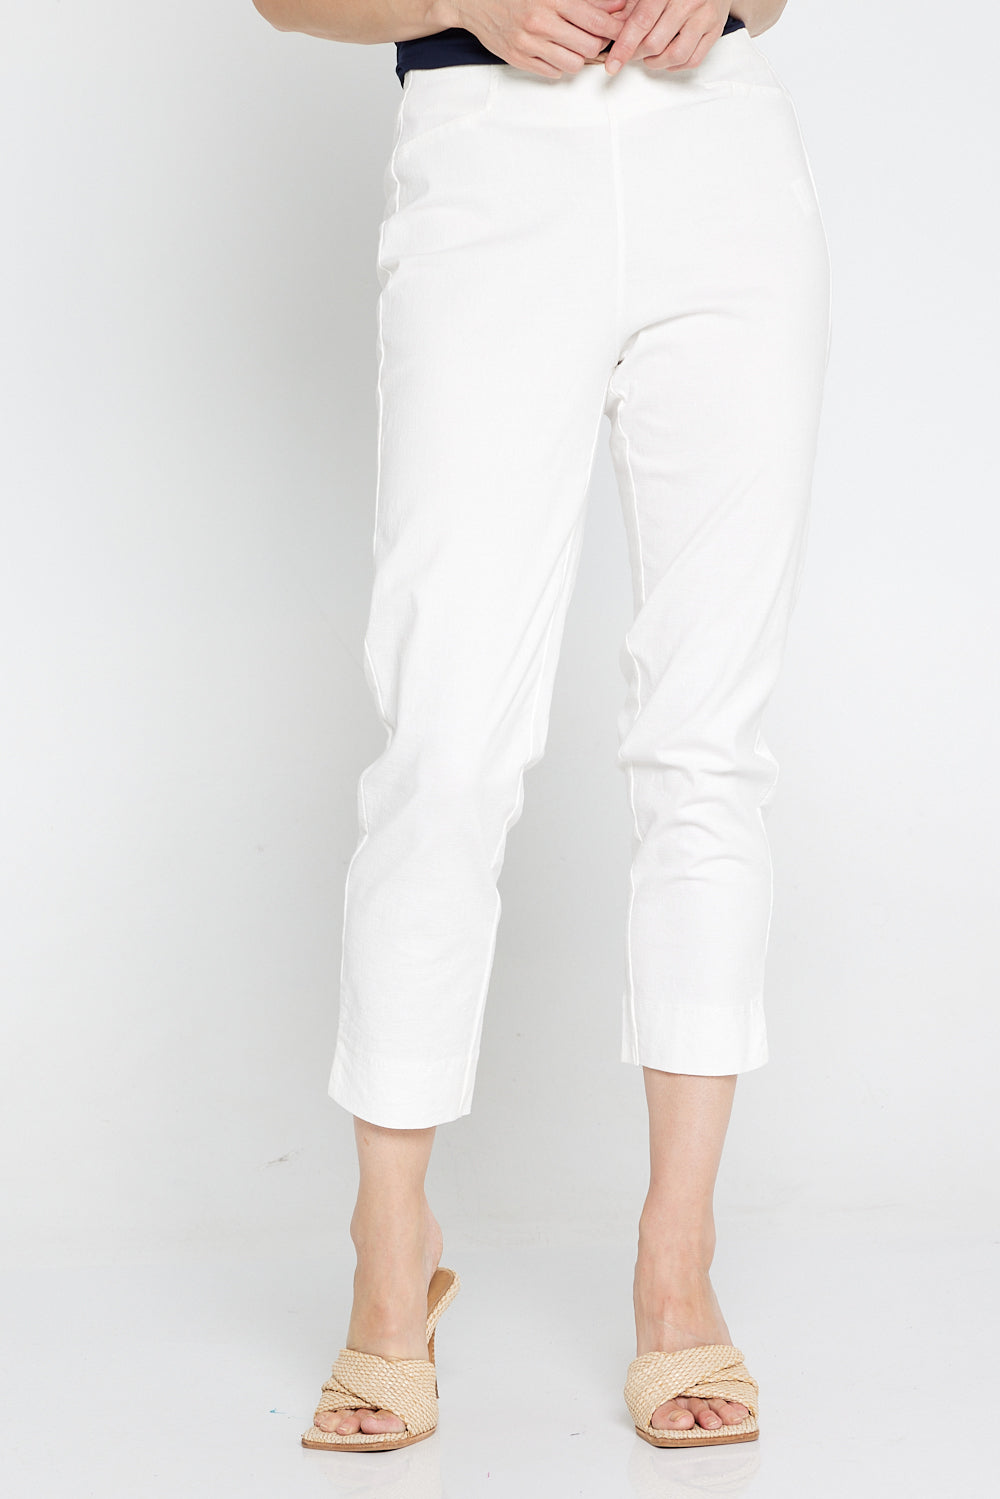 Women's White Summer Cotton Trousers PANTS For Girls White Cotton Straight  Fit Women's Cigarette Pants Trousers